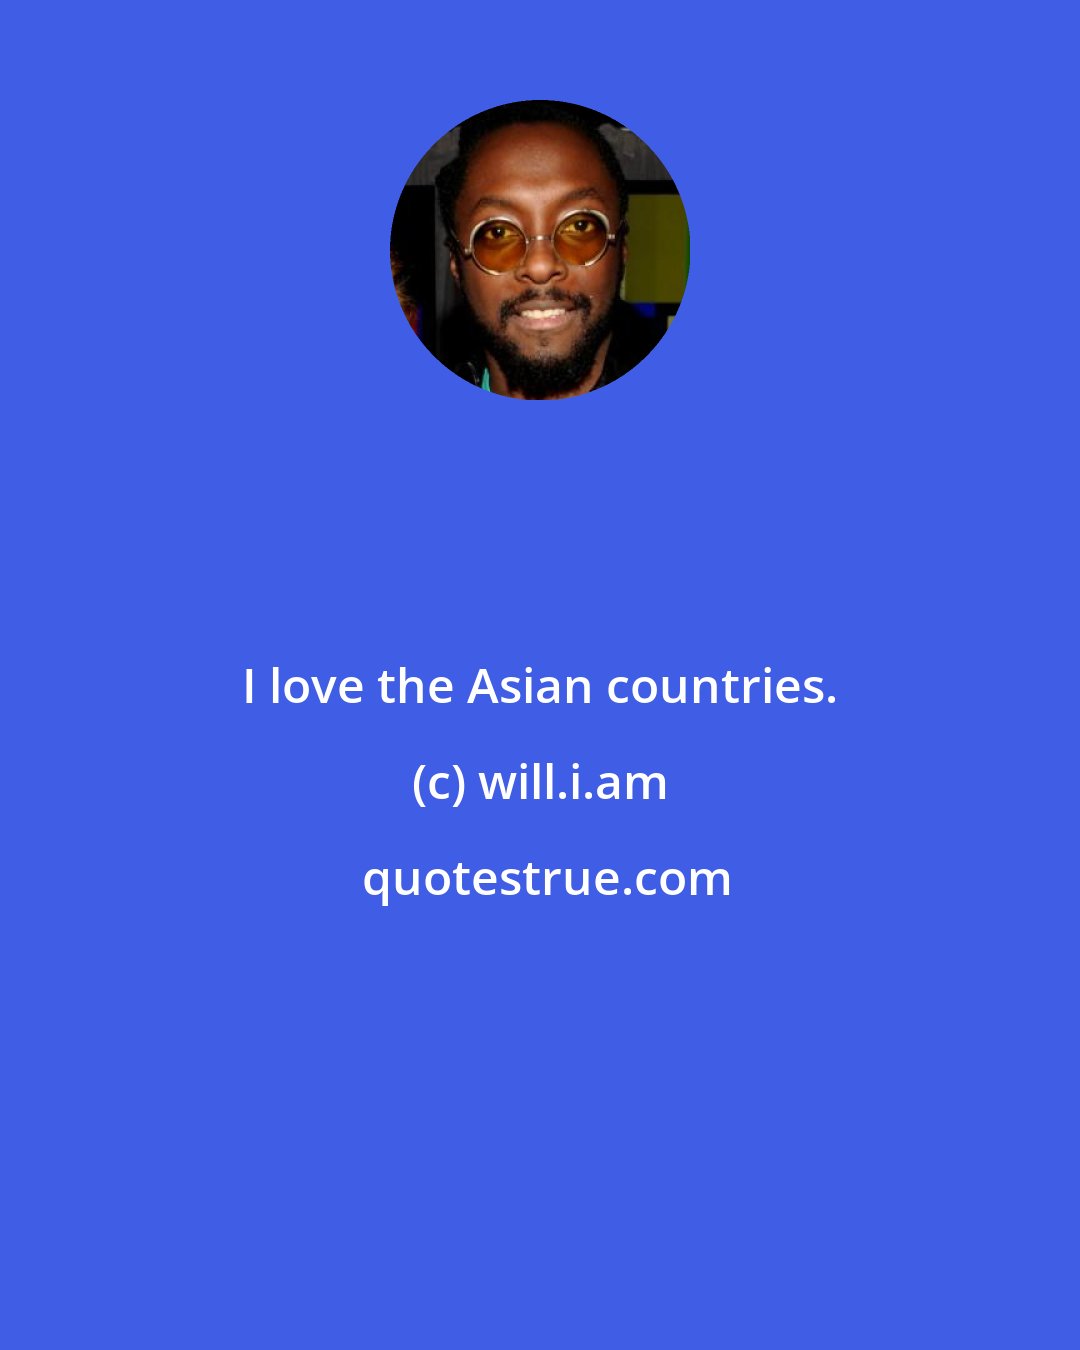 will.i.am: I love the Asian countries.